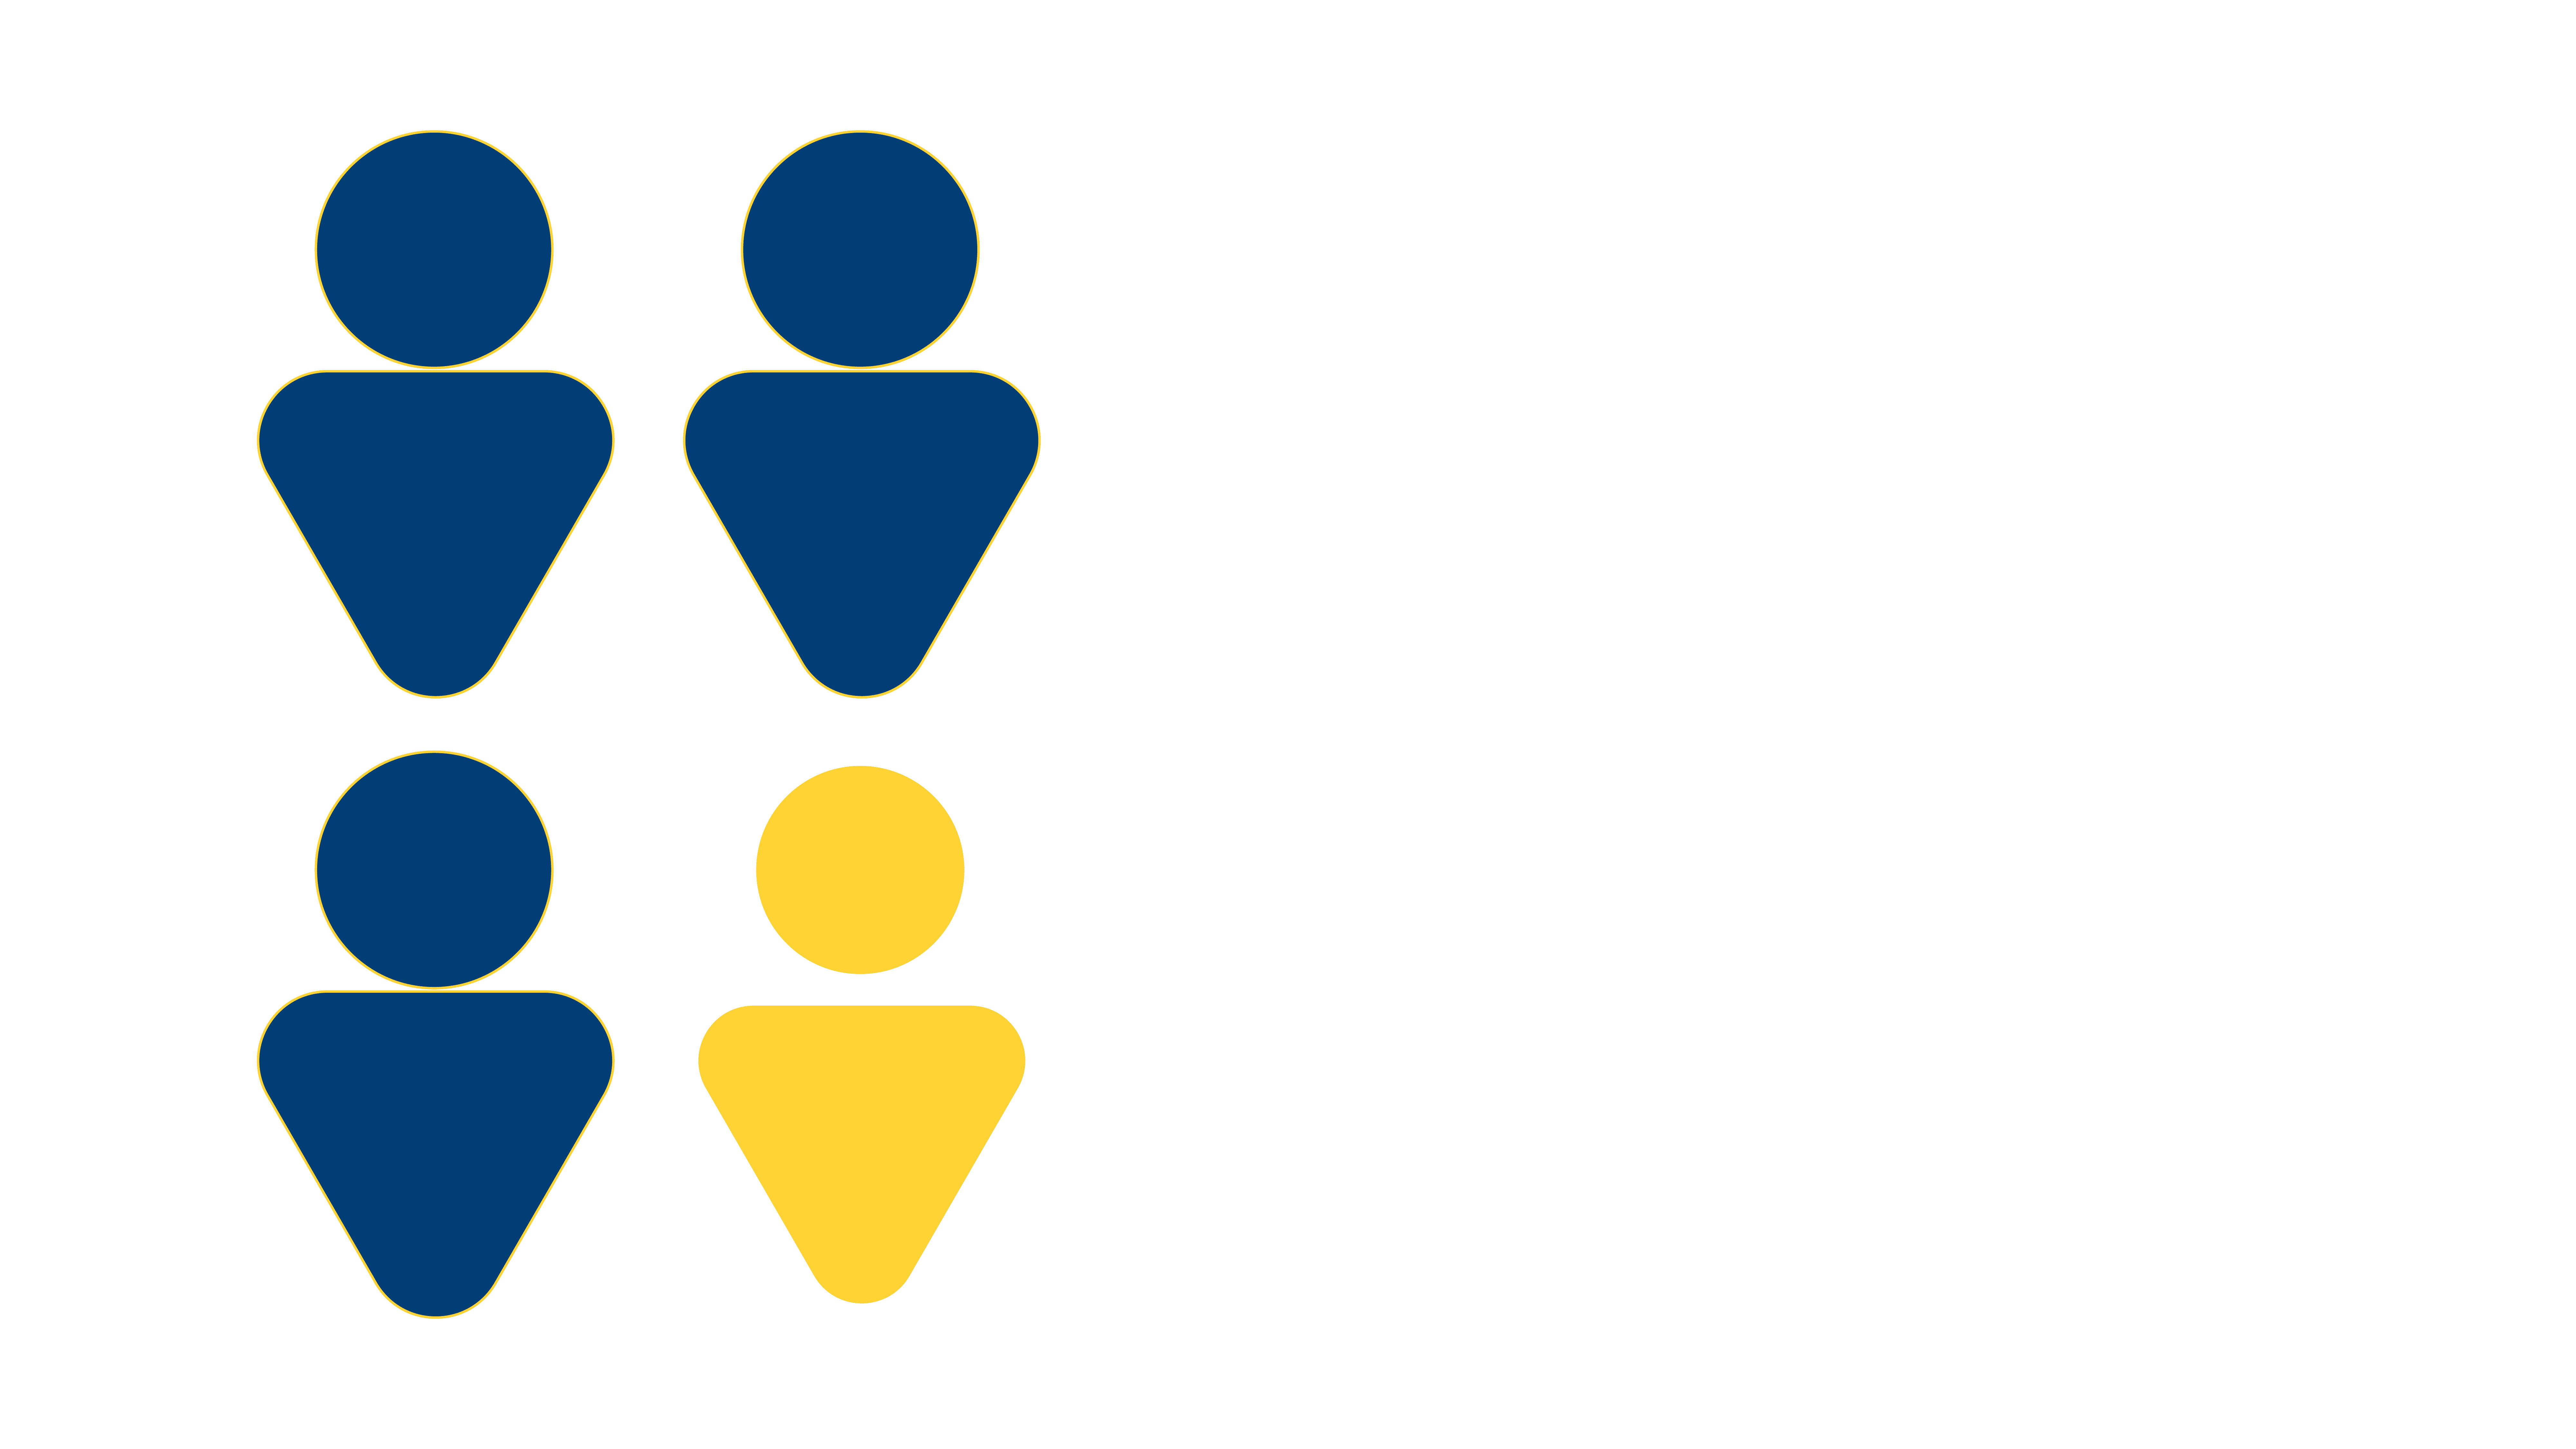 Graphic shows 4 person icons, representing 4 families. 3 of the icons are blue and one of the icons is yellow. This represents that 3 in 4 families at Noble Schools feel like their school is preparing their student for their next academic year.